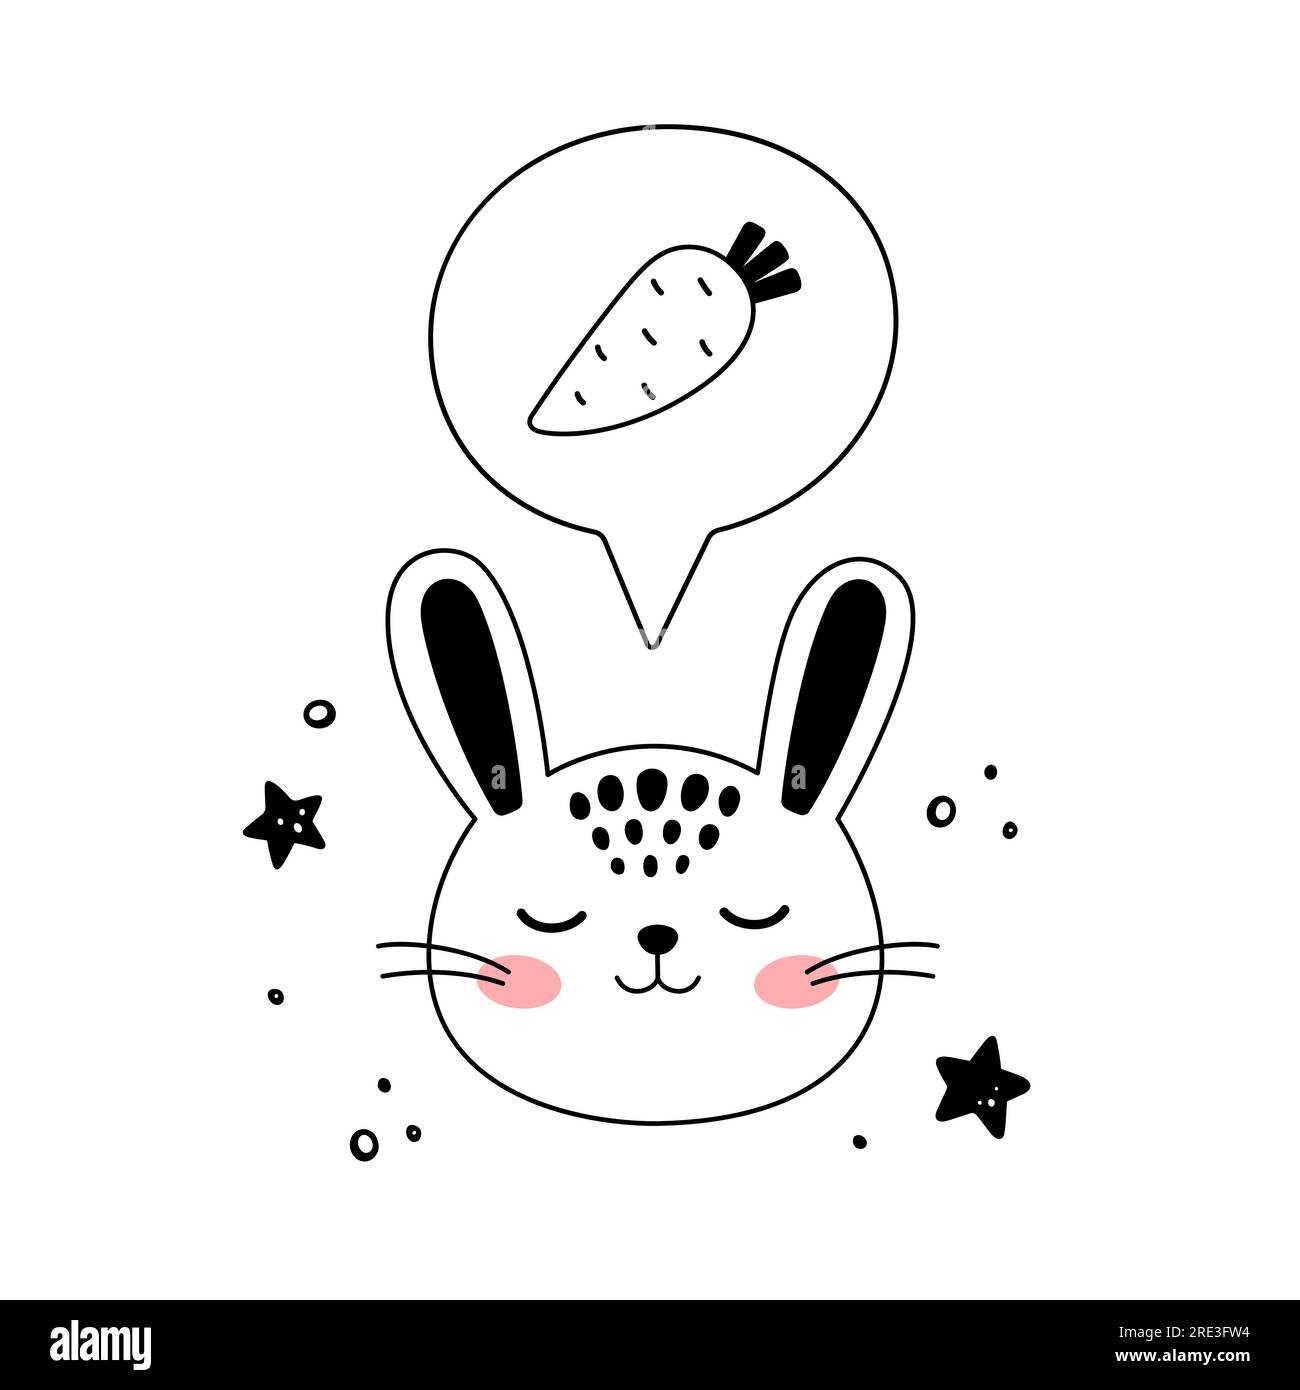 Little bunny dreamer is in doodle style. Cute cartoon Rabbit is dreaming about carrot. Hand drawn illustration. Kids design hare muzzle. Vector illustration kids coloring book Stock Vector